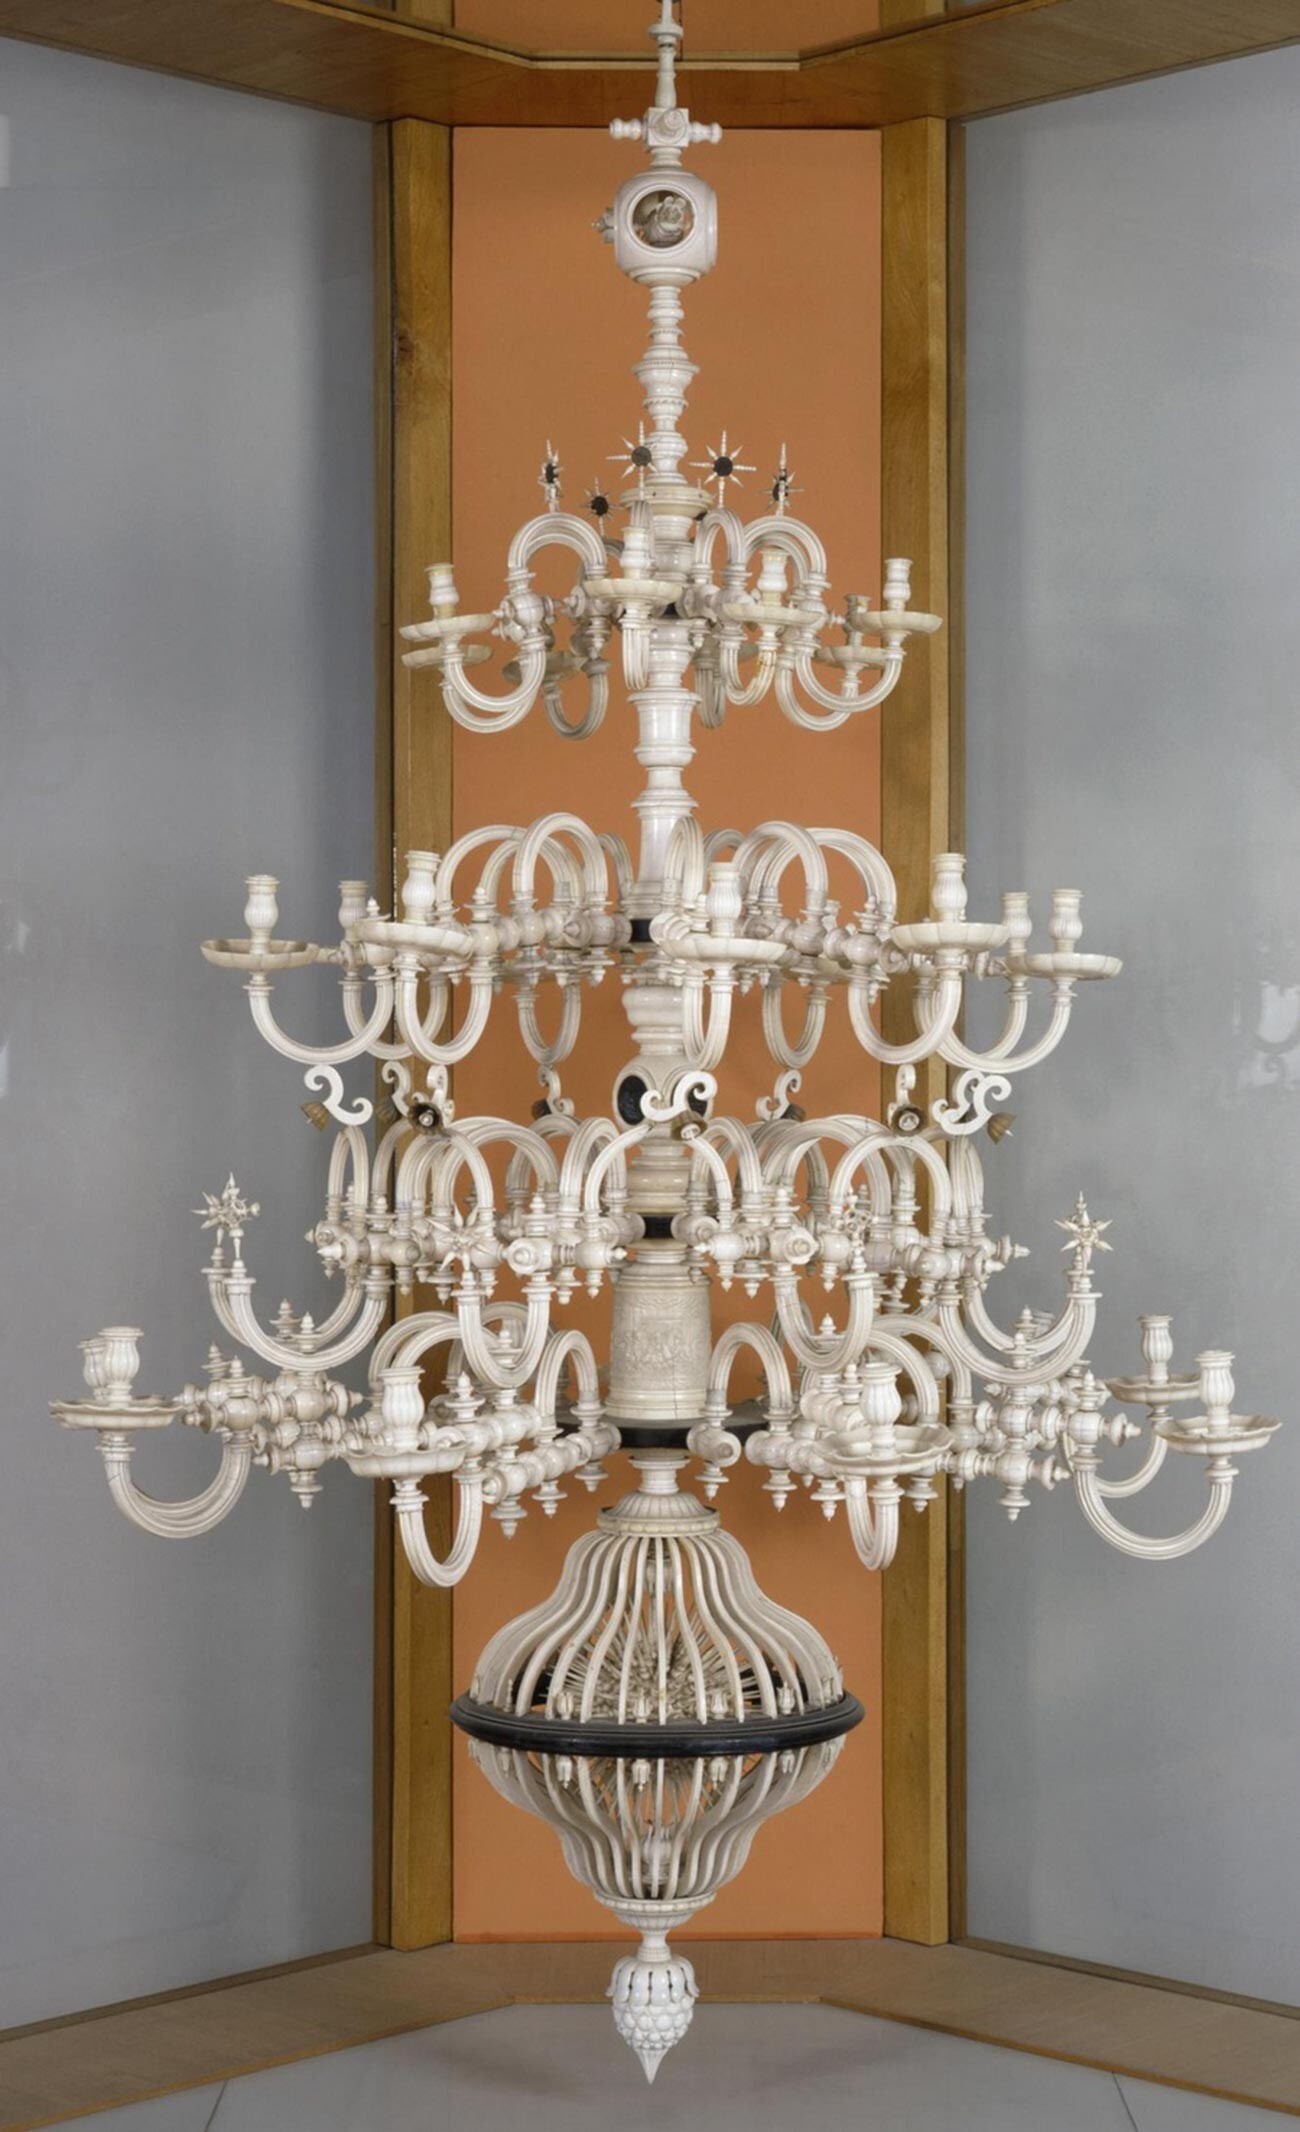 A chandelier created in Peter's turnery by Ivan Zakharov and Peter the Great.